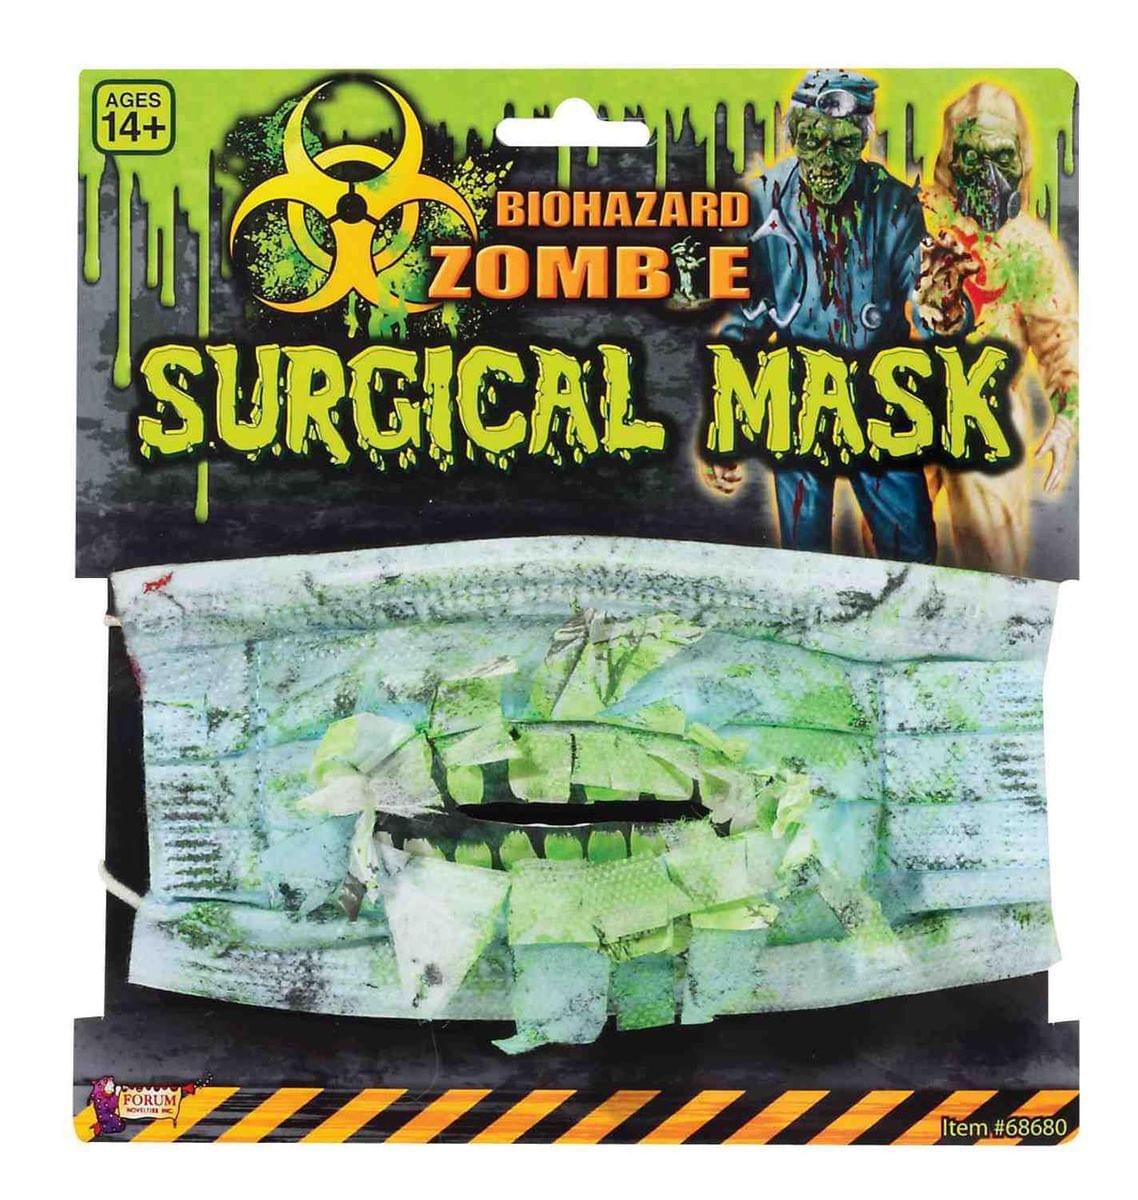 Biohazard Zombie Costume Surgical Mask With Teeth